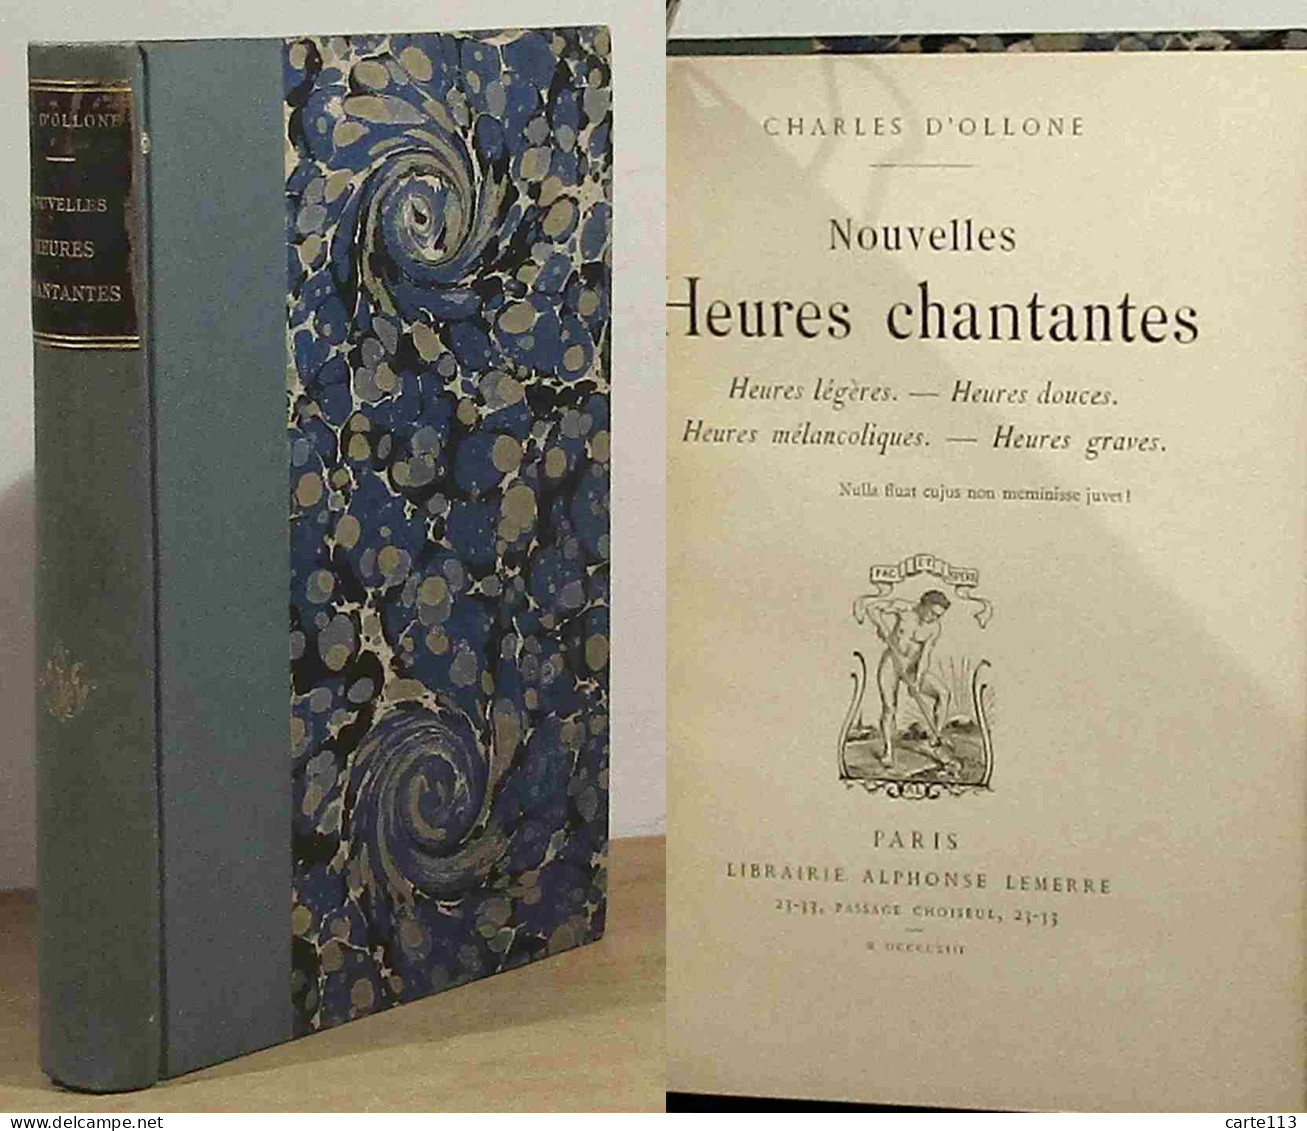 OLLONE Charles D' - NOUVELLES HEURES CHANTANTES - HEURES LEGERES - HEURES DOUCES - HEURES - 1901-1940